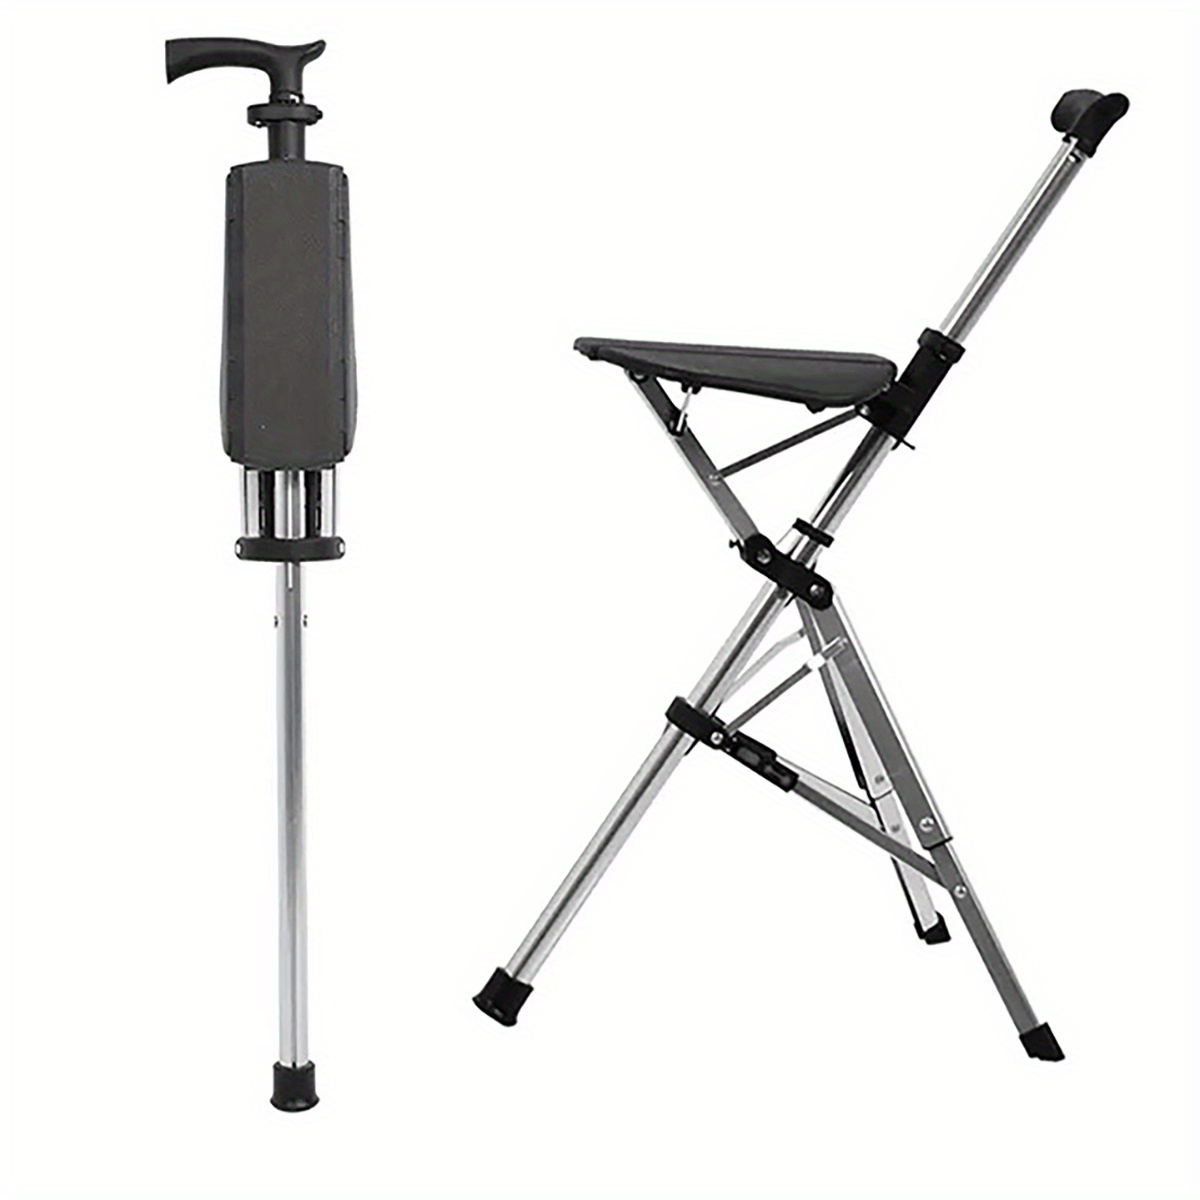 DINVES Portable Cane Seat, Walking Cane with Seat, India